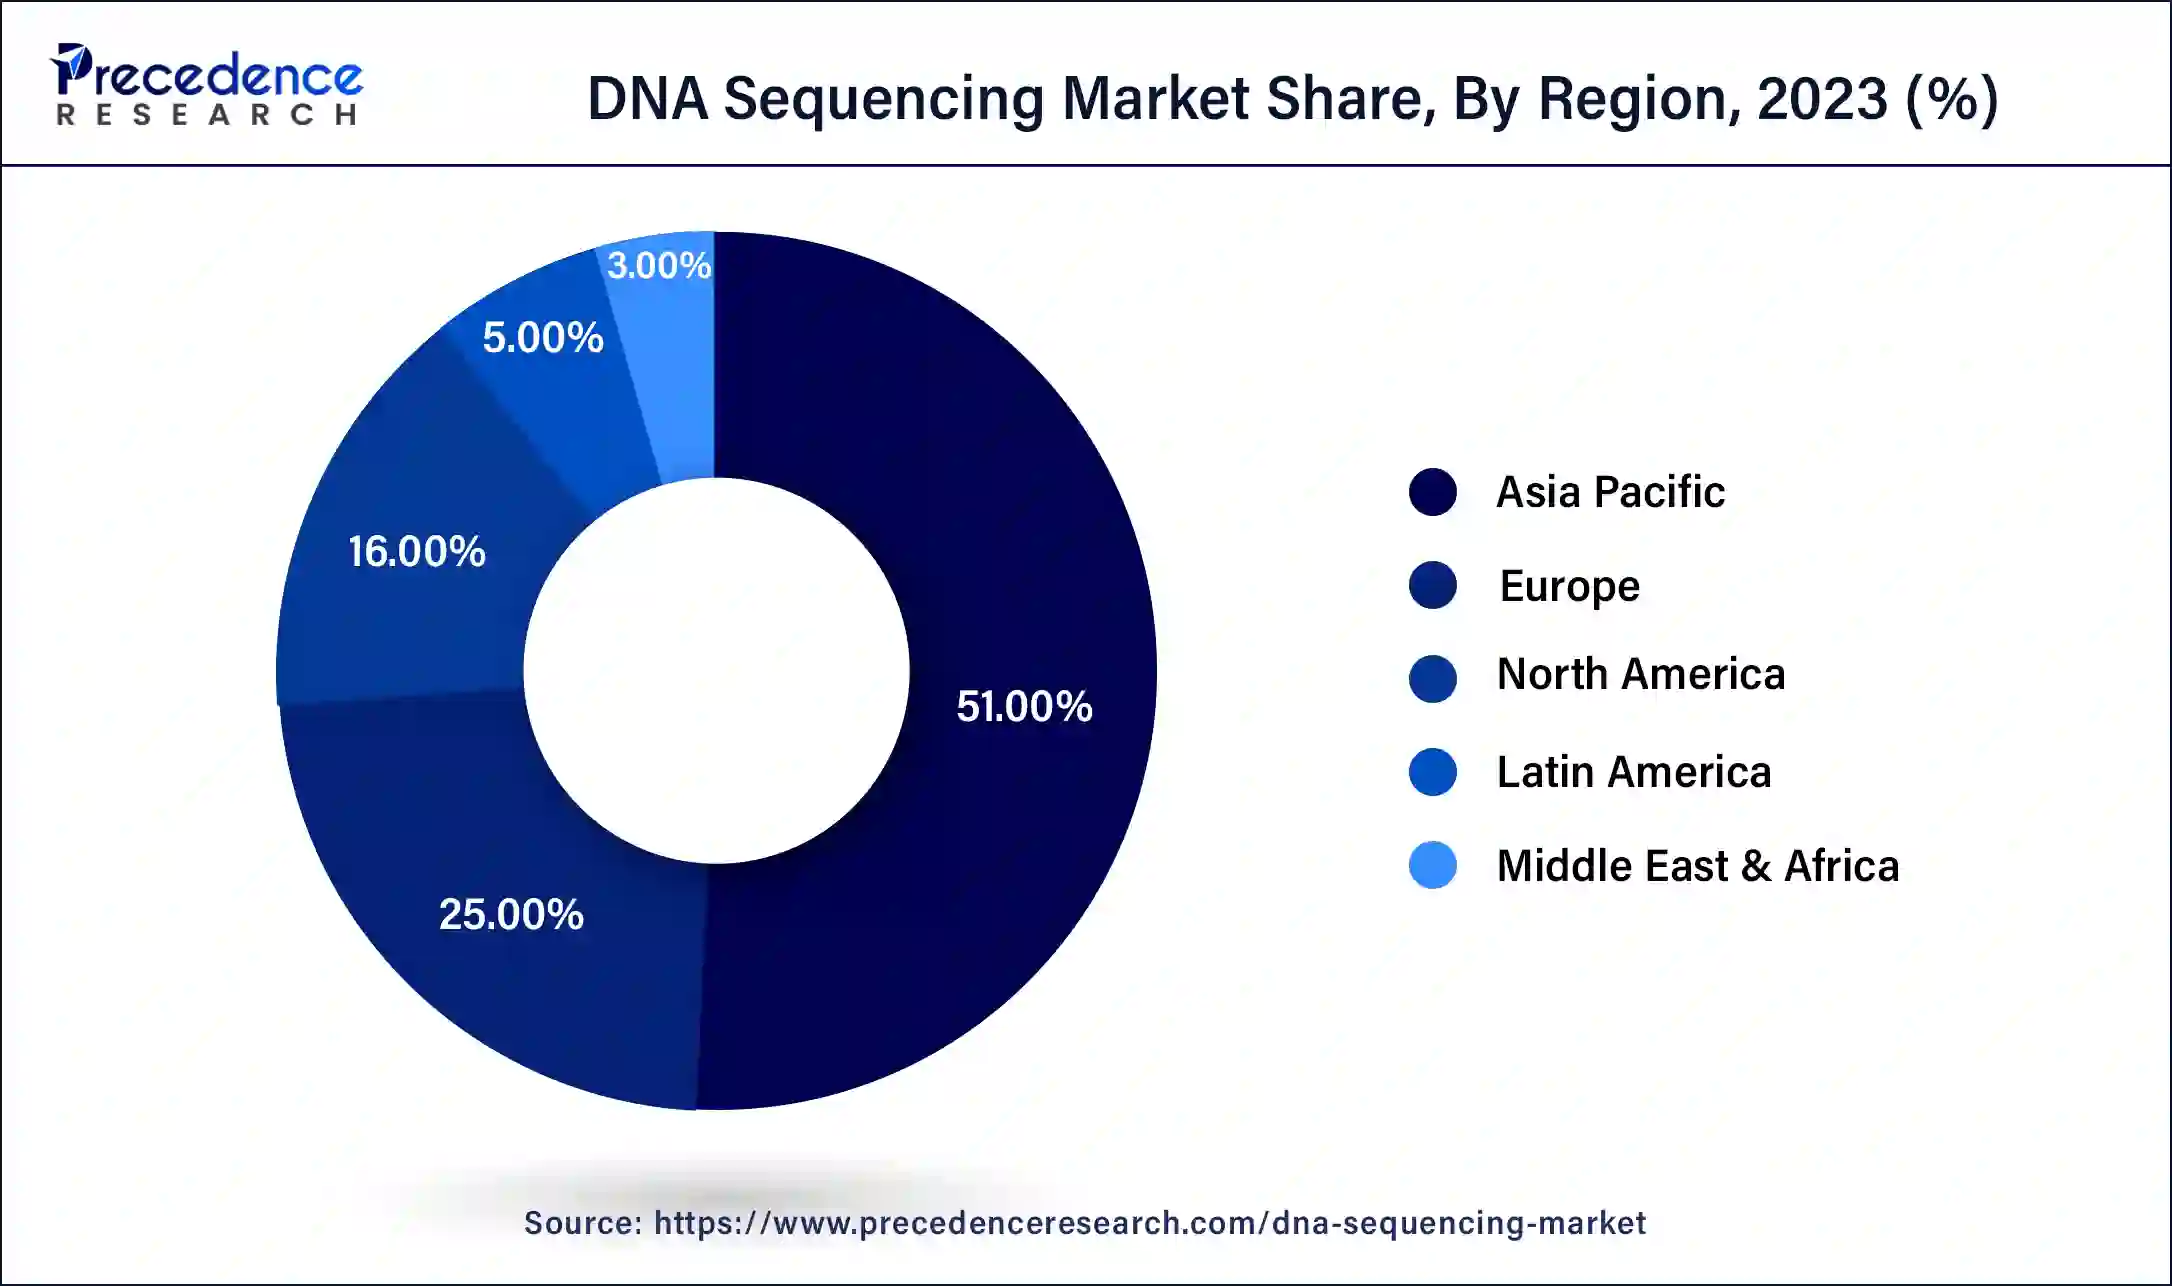 DNA Sequencing Market Share, By Region, 2023 (%)